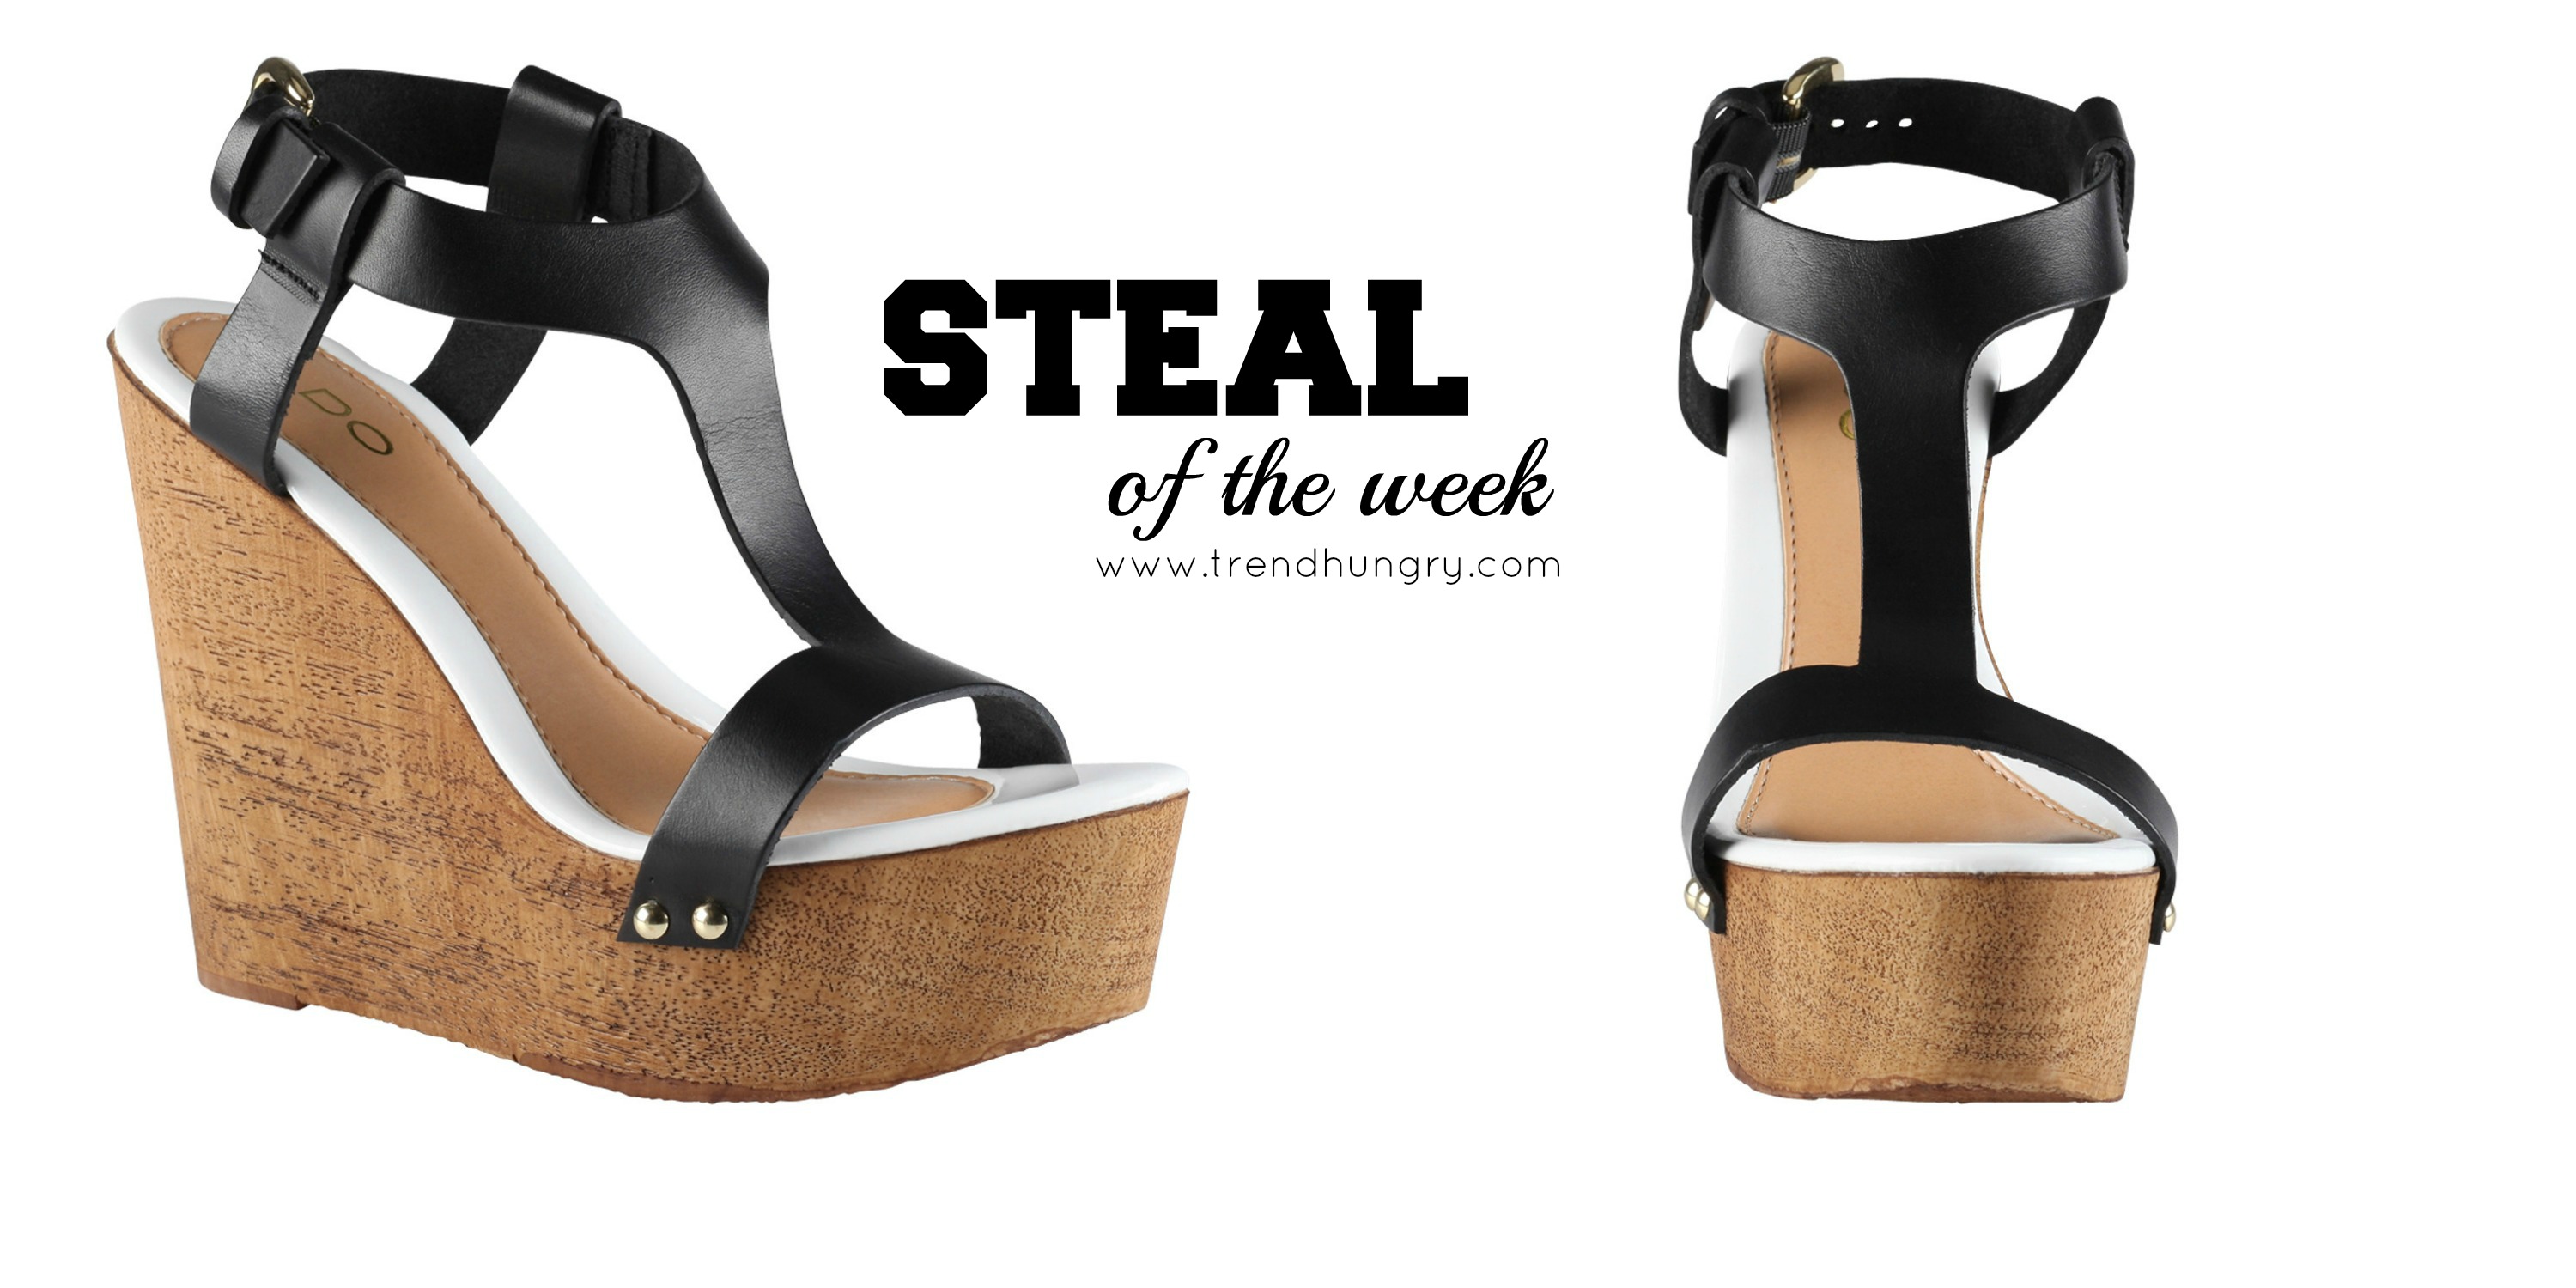 Steal of the week_leather wedges_summer shoes_spring_aldo